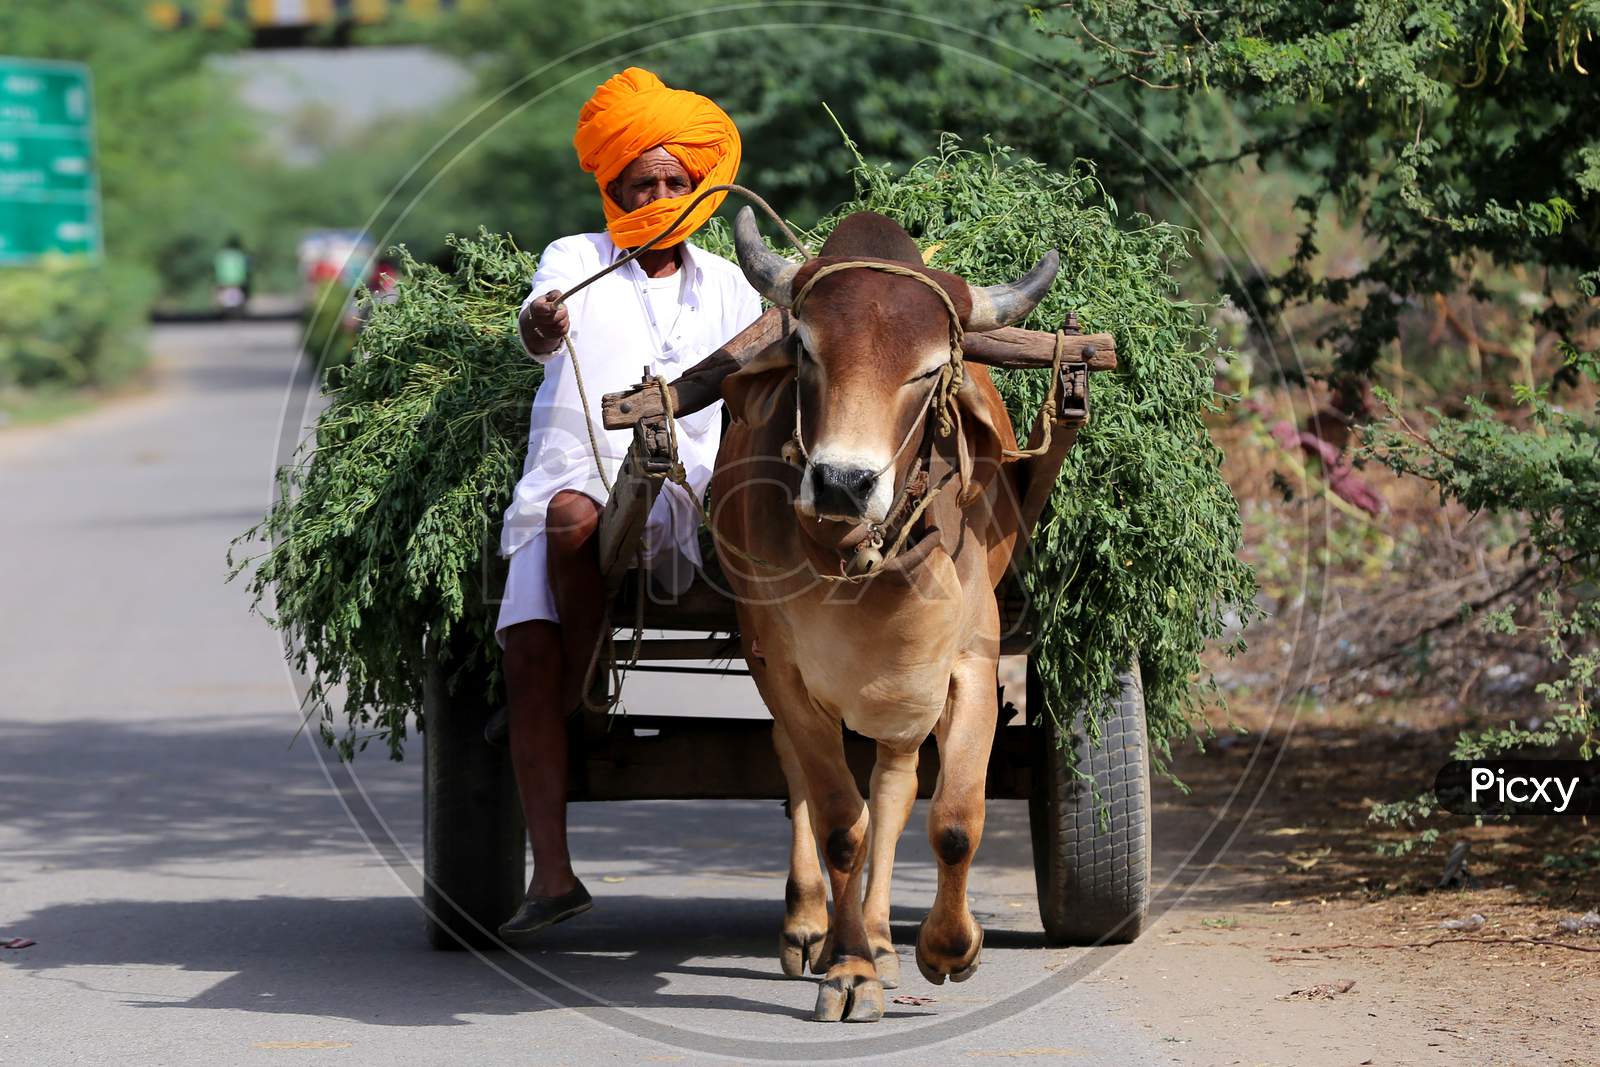 A man return from the fields with the produce on a bullock cart on the outskirts of Ajmer, Rajasthan, India on 09 May 2020.